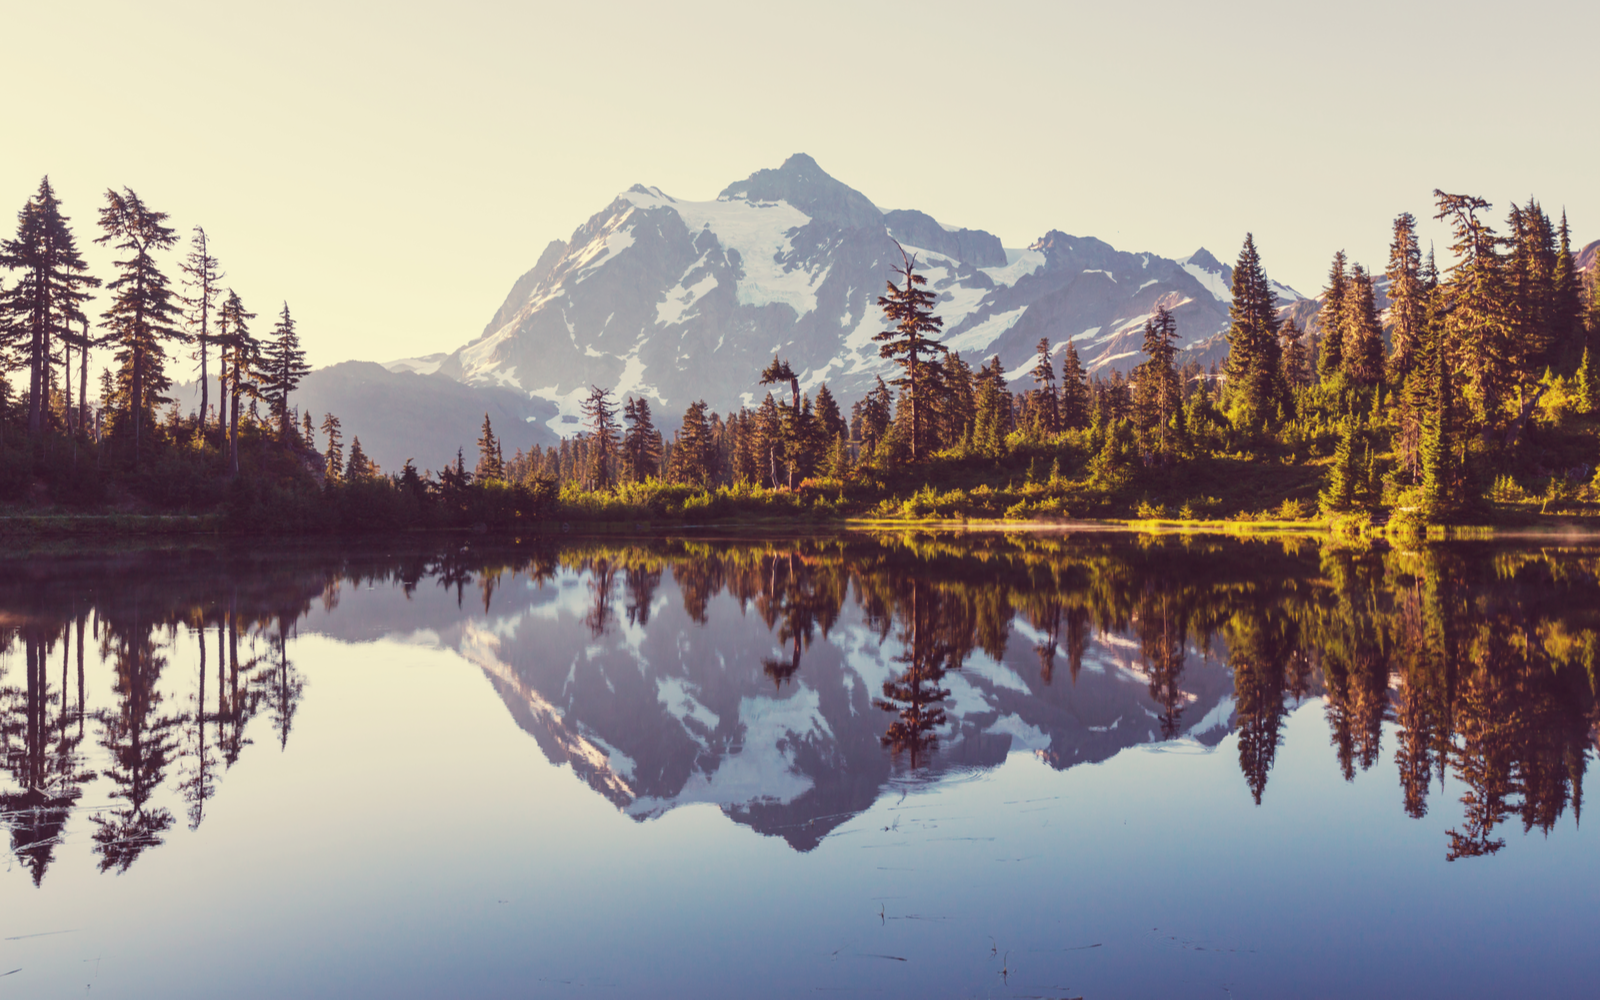 Mount Shuksan as seen from a park, one of the best places to visit in Washington State